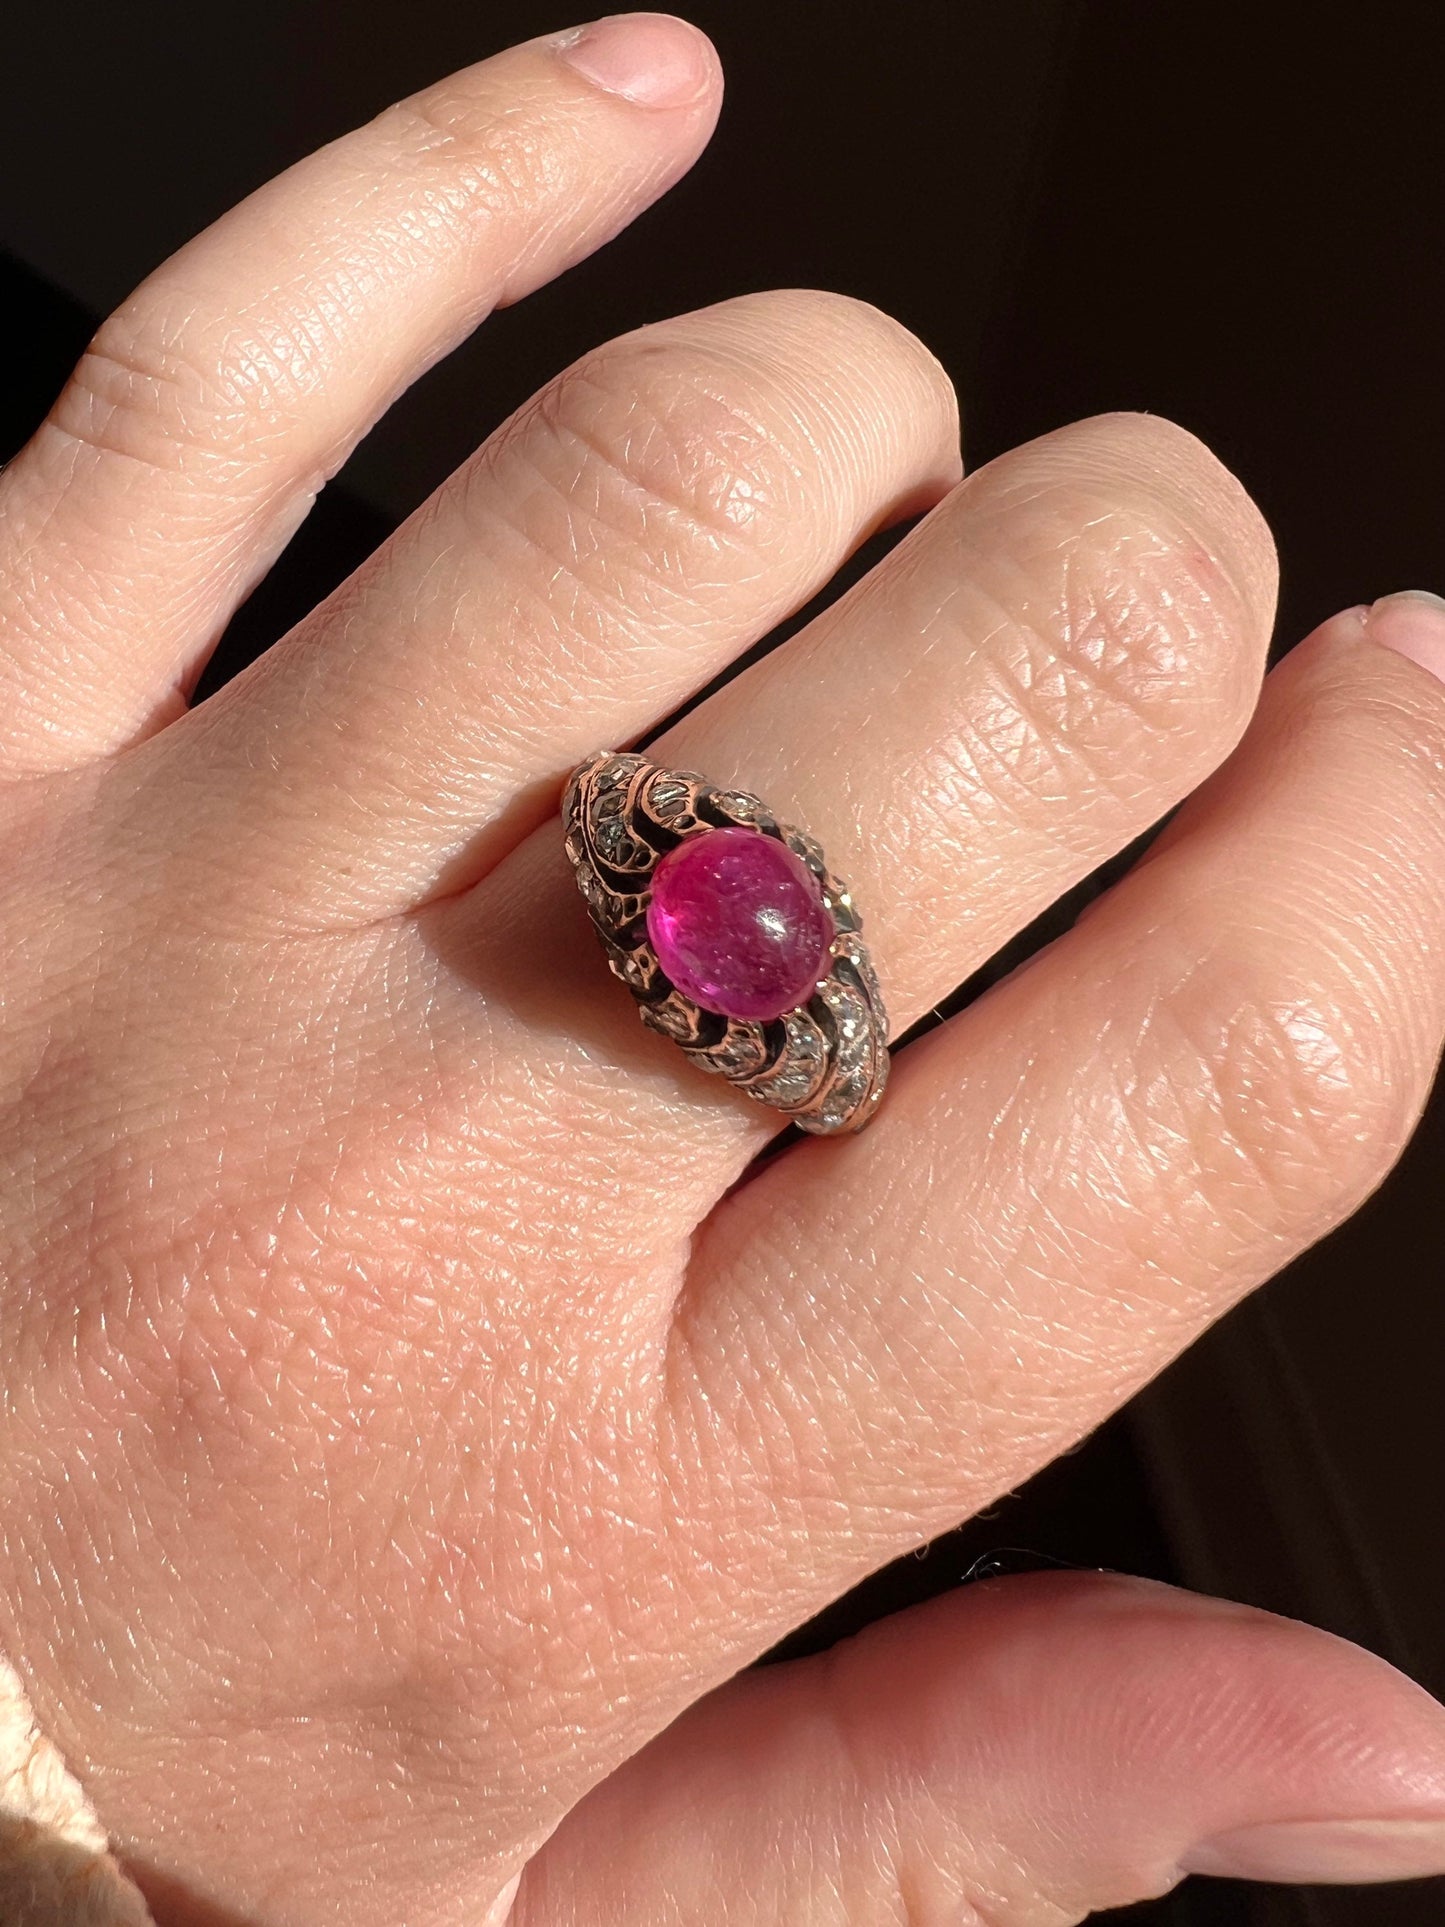 Victorian ANTIQUE Natural Pink RUBY 50 (!) Rose Cut DIAMOND 1 Carat Swirl Antique Ring 14k Rosy Gold Stacker Romantic Gift Belle Epoque Tall